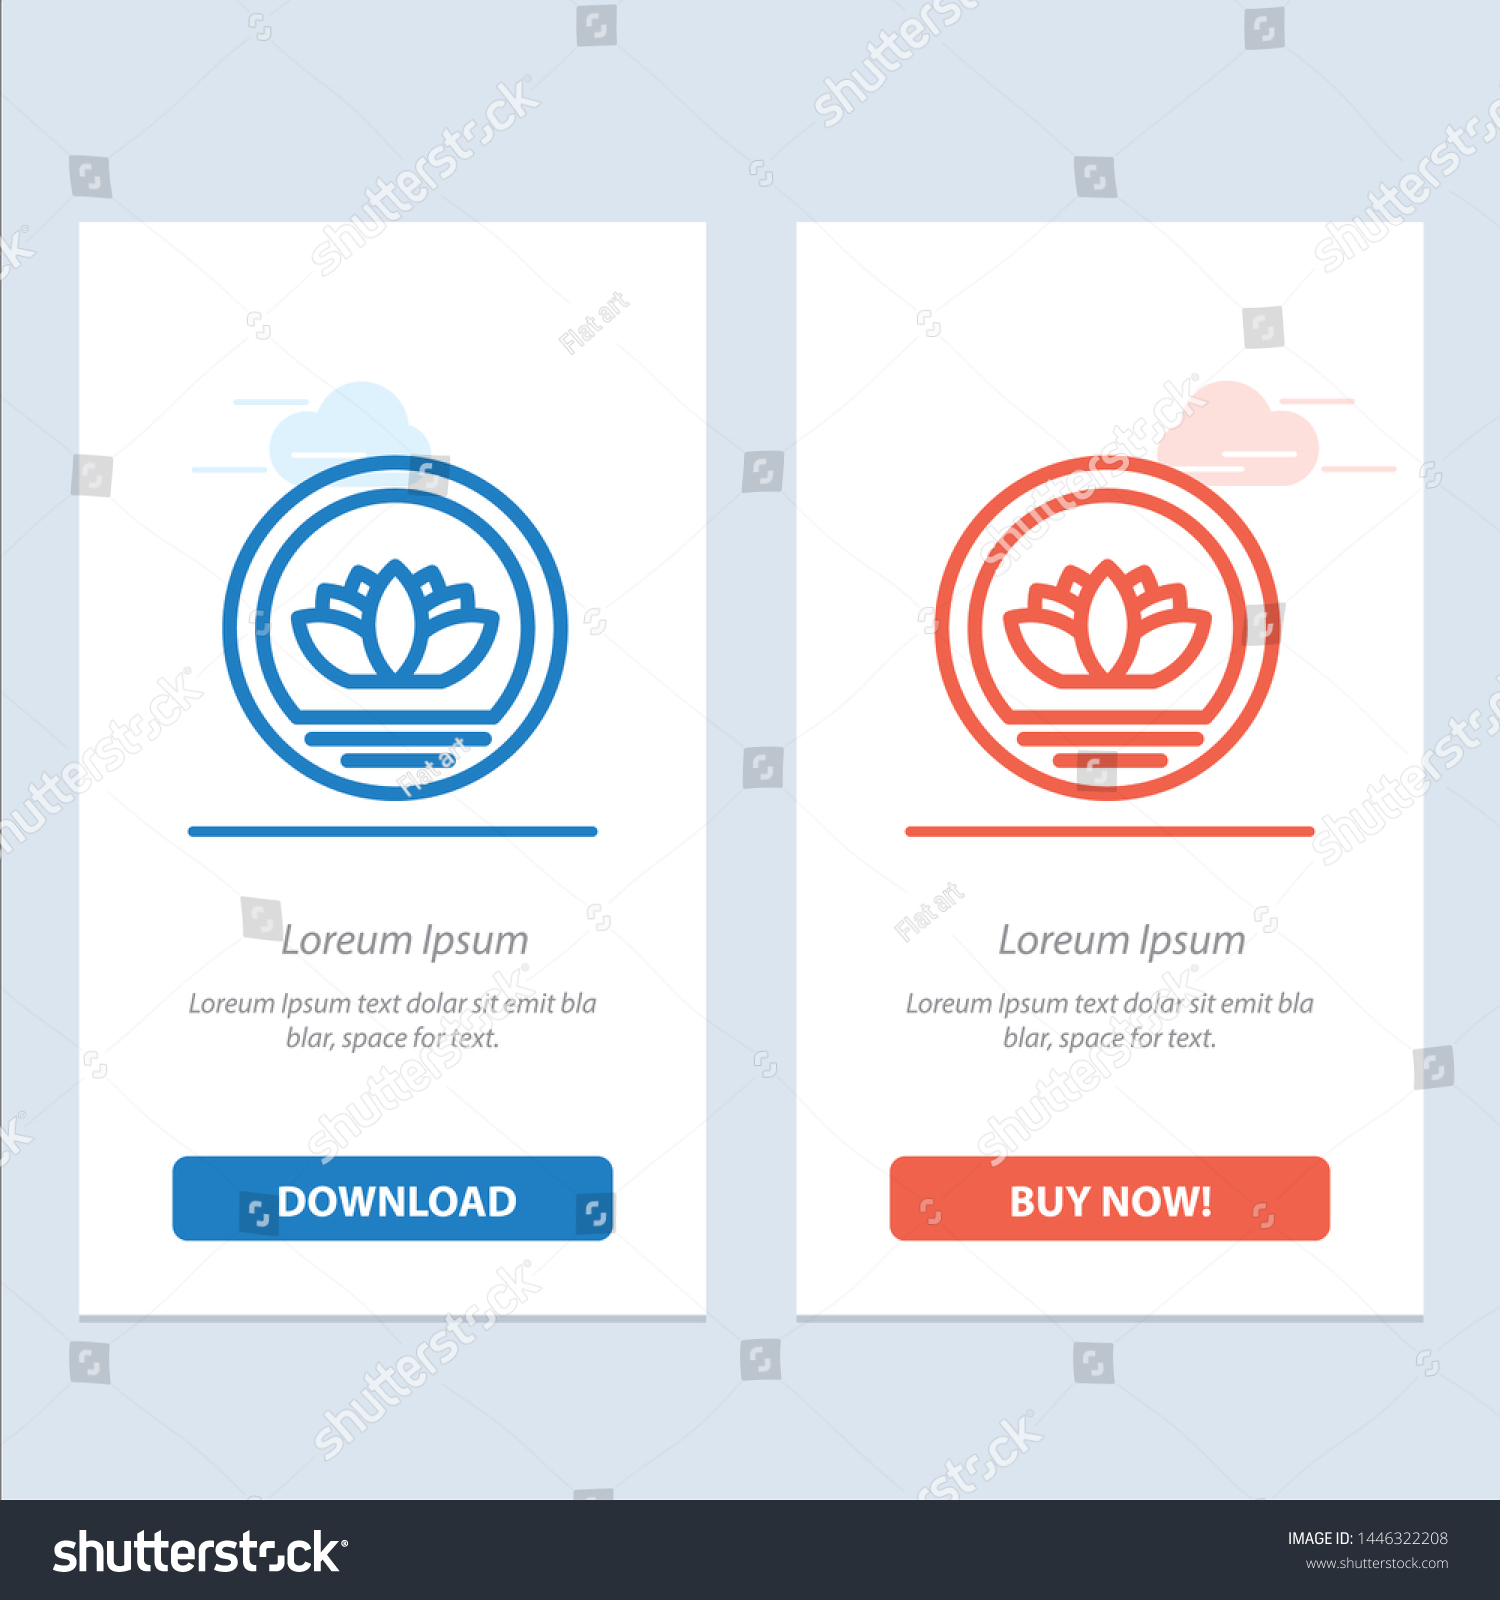 SVG of Bangladesh, Bangladeshi, Coin, Coins  Blue and Red Download and Buy Now web Widget Card Template svg